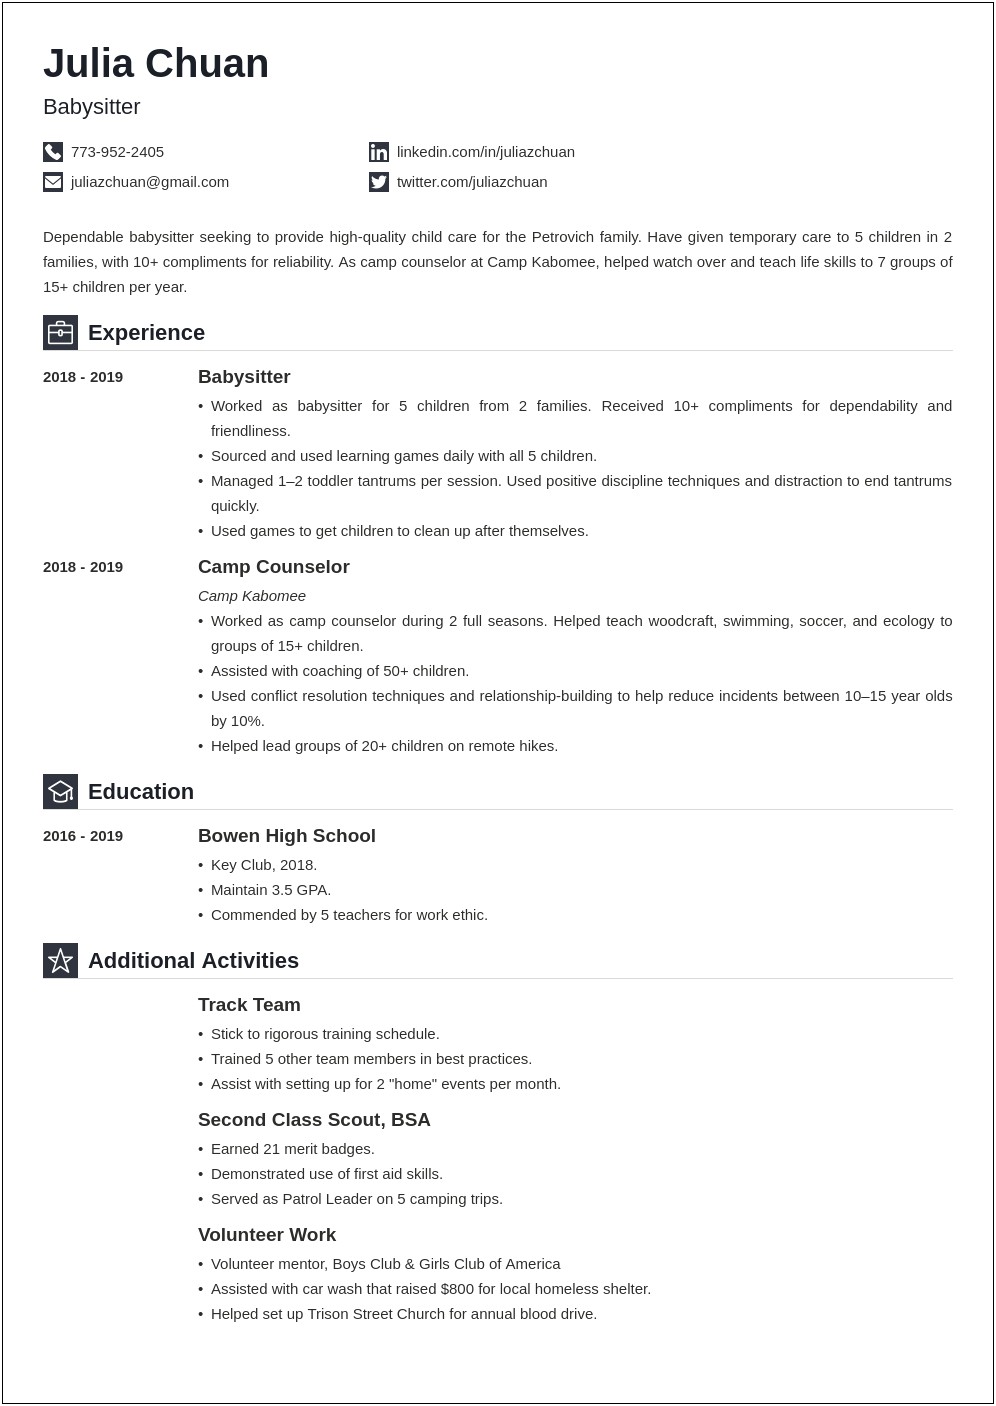 Resumes With Relevant Experience And Other Work Expeirnce